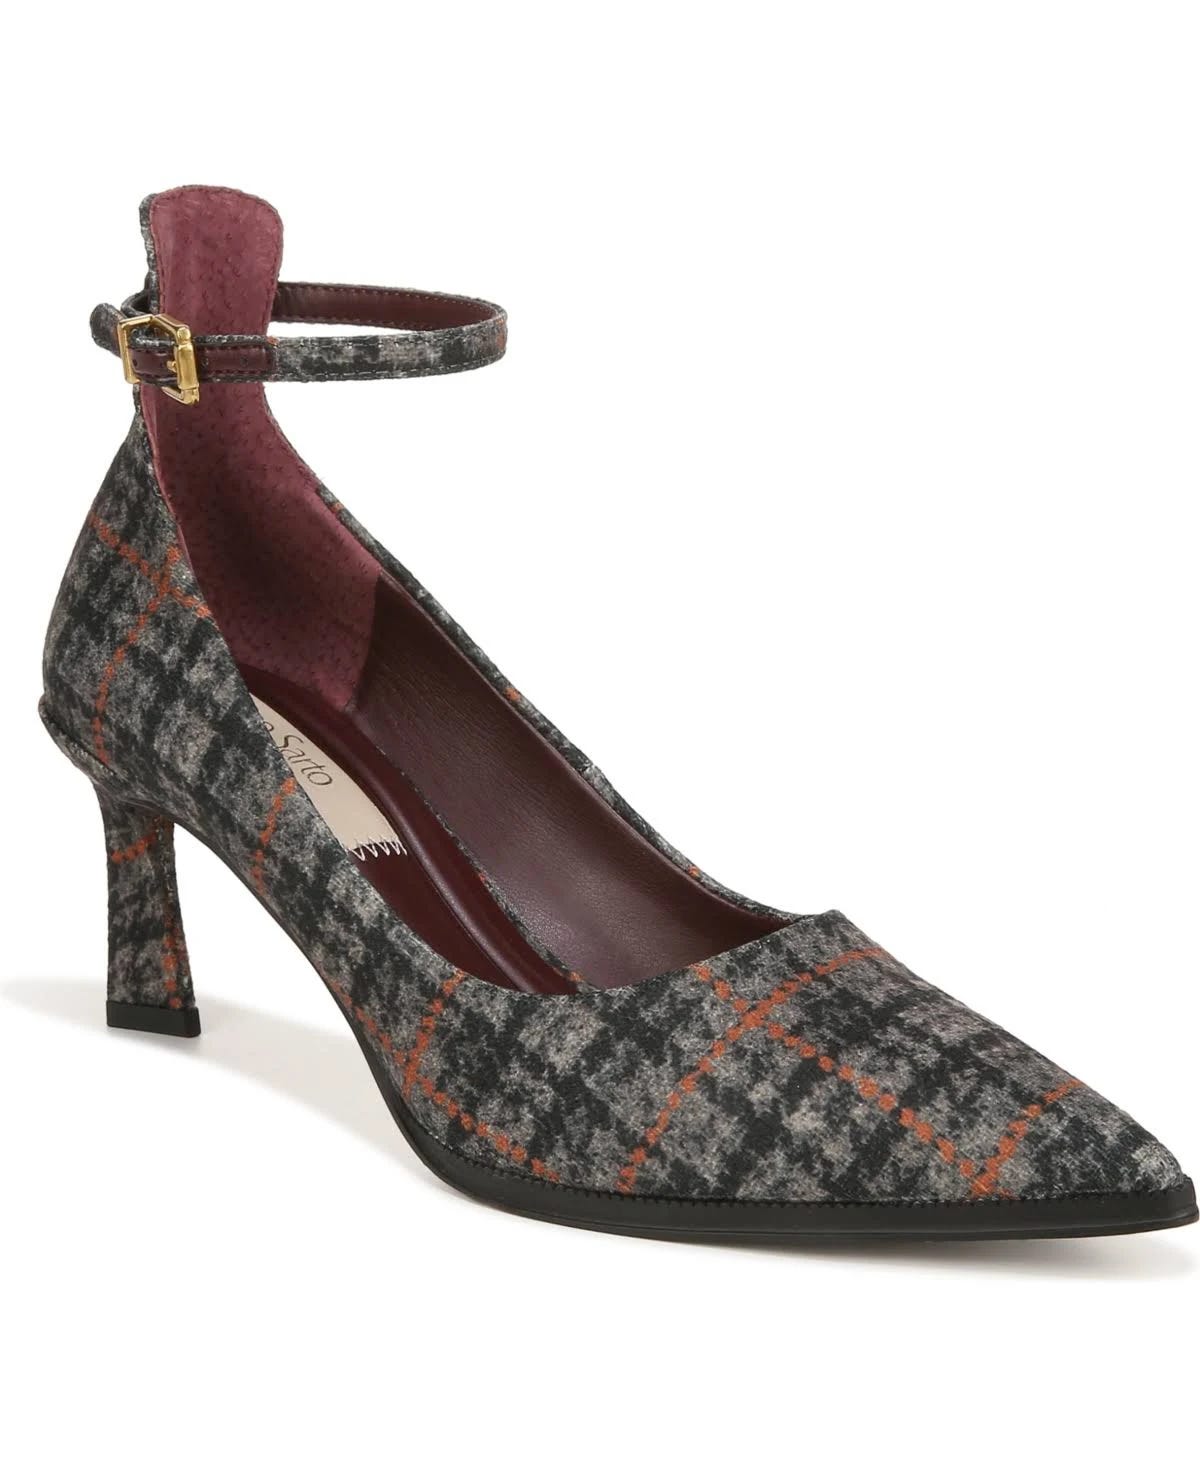 Comfortable Plaid Pointed Toe Pumps with Adjustable Buckle Closure | Image